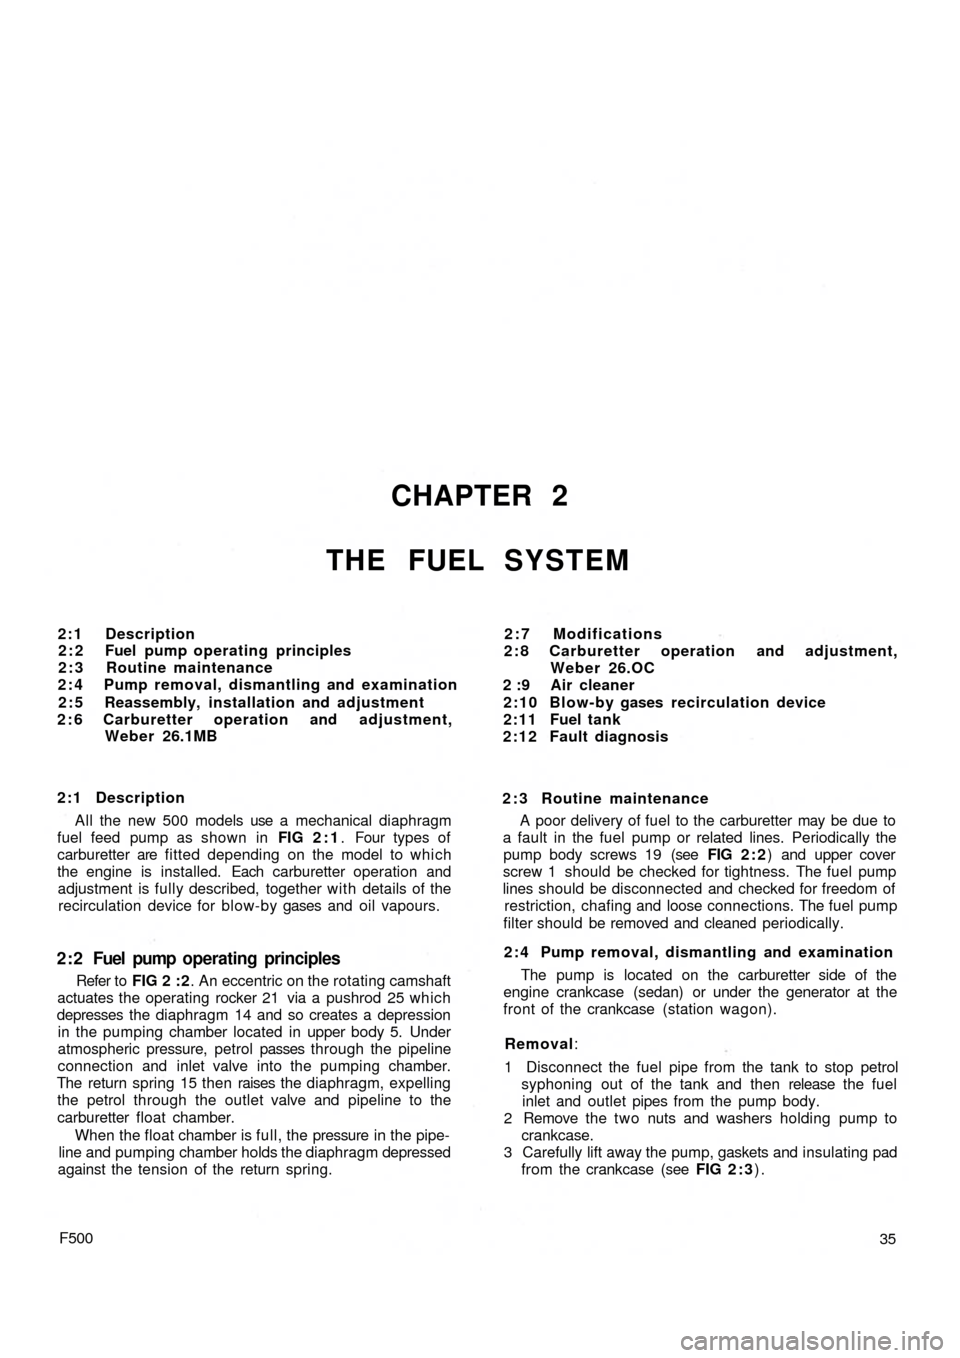 FIAT 500 1971 1.G Workshop Manual CHAPTER 2
THE FUEL SYSTEM
2:1 Description
2 : 2 Fuel pump operating principles
2 : 3 Routine maintenance
2 : 4 Pump removal, dismantling and examination
2 : 5 Reassembly, installation and adjustment
2